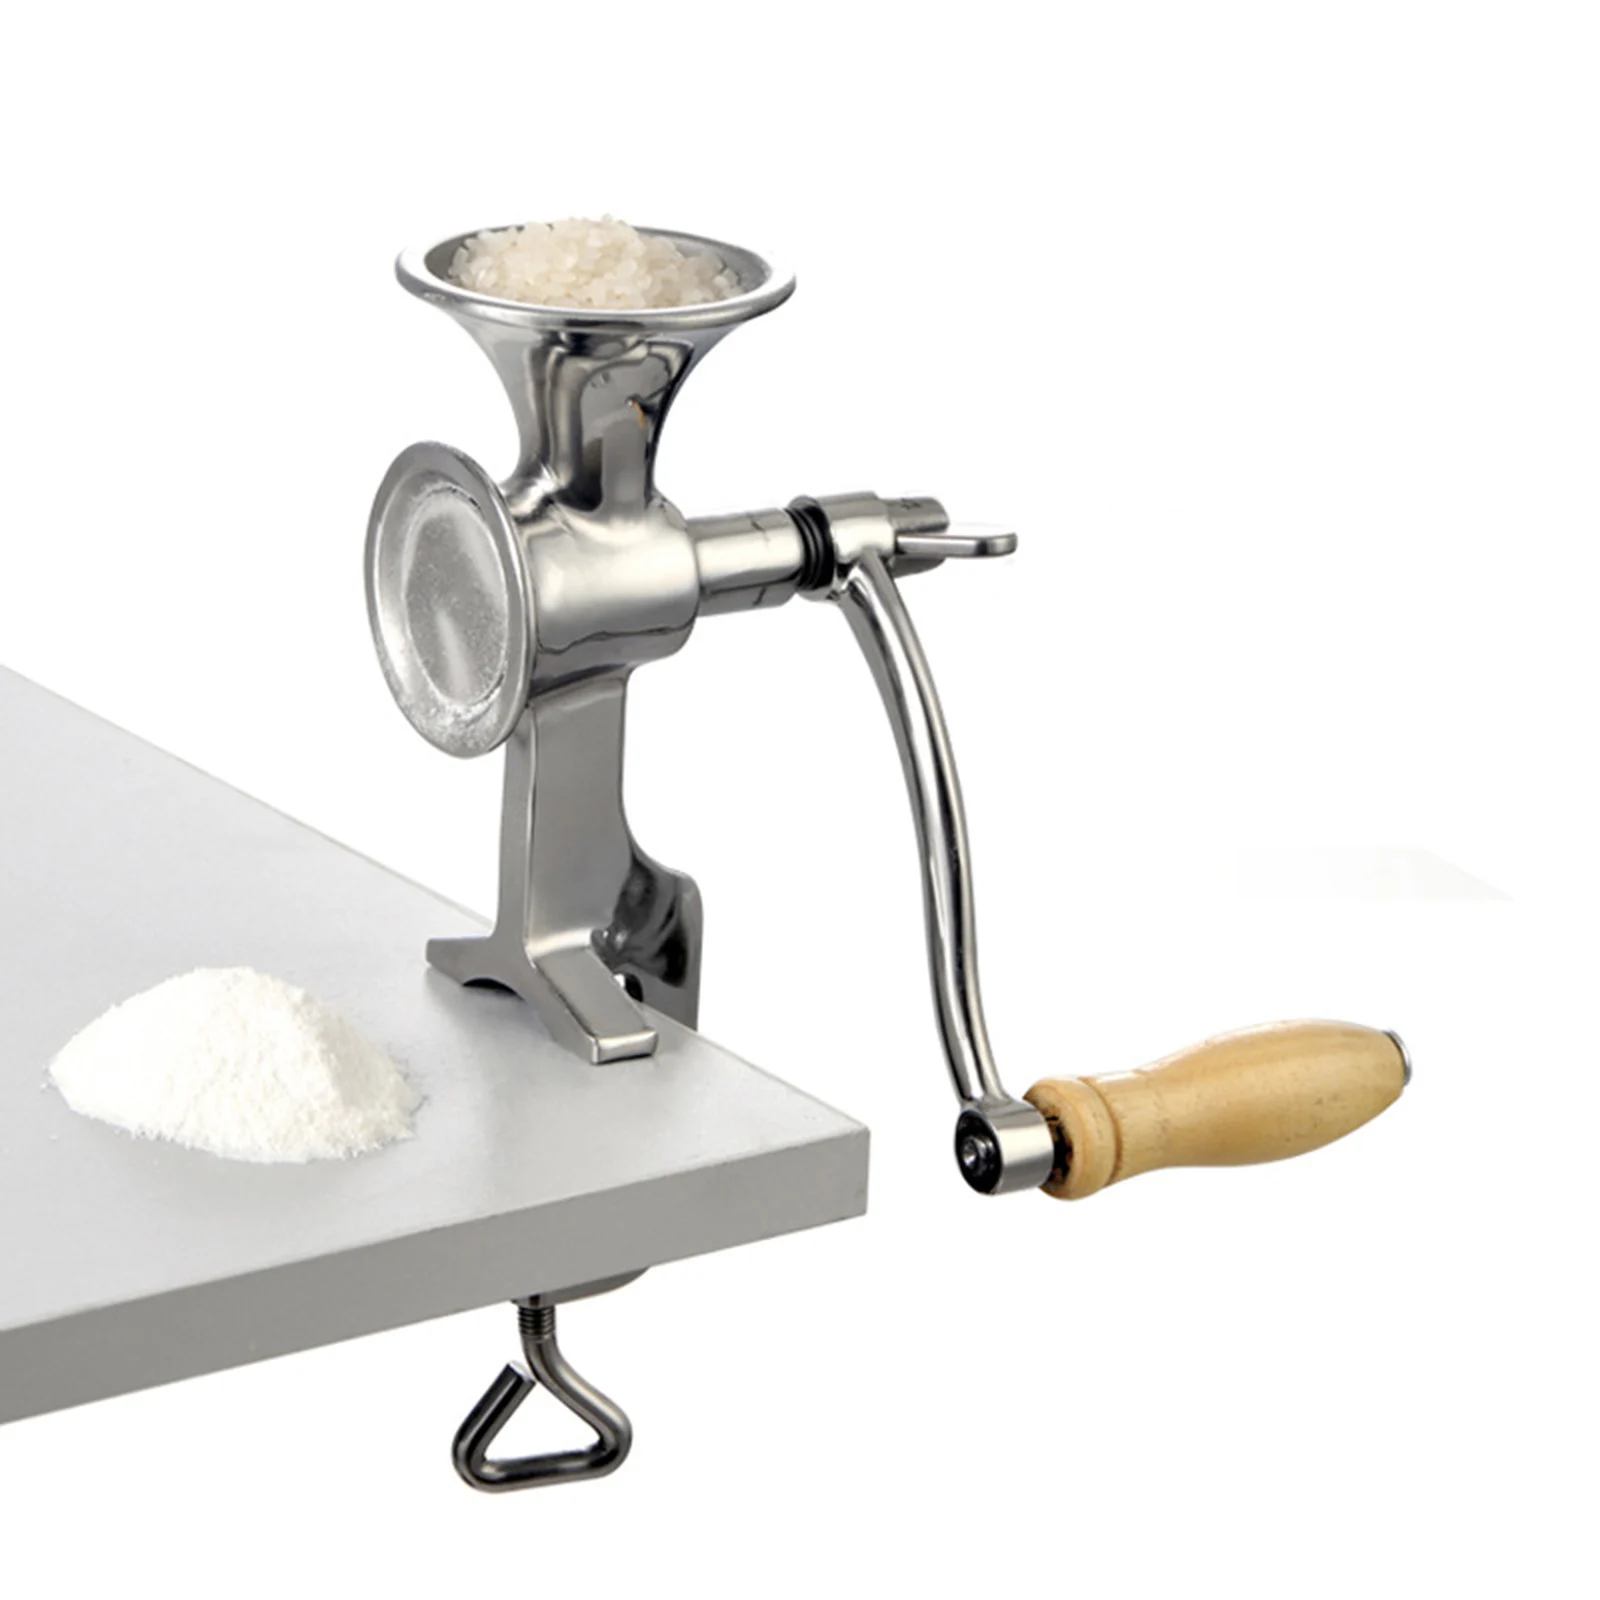 Hand Crank Grain Mill Table Clamp Grain Grinder for Spice Corn Seed Wheat